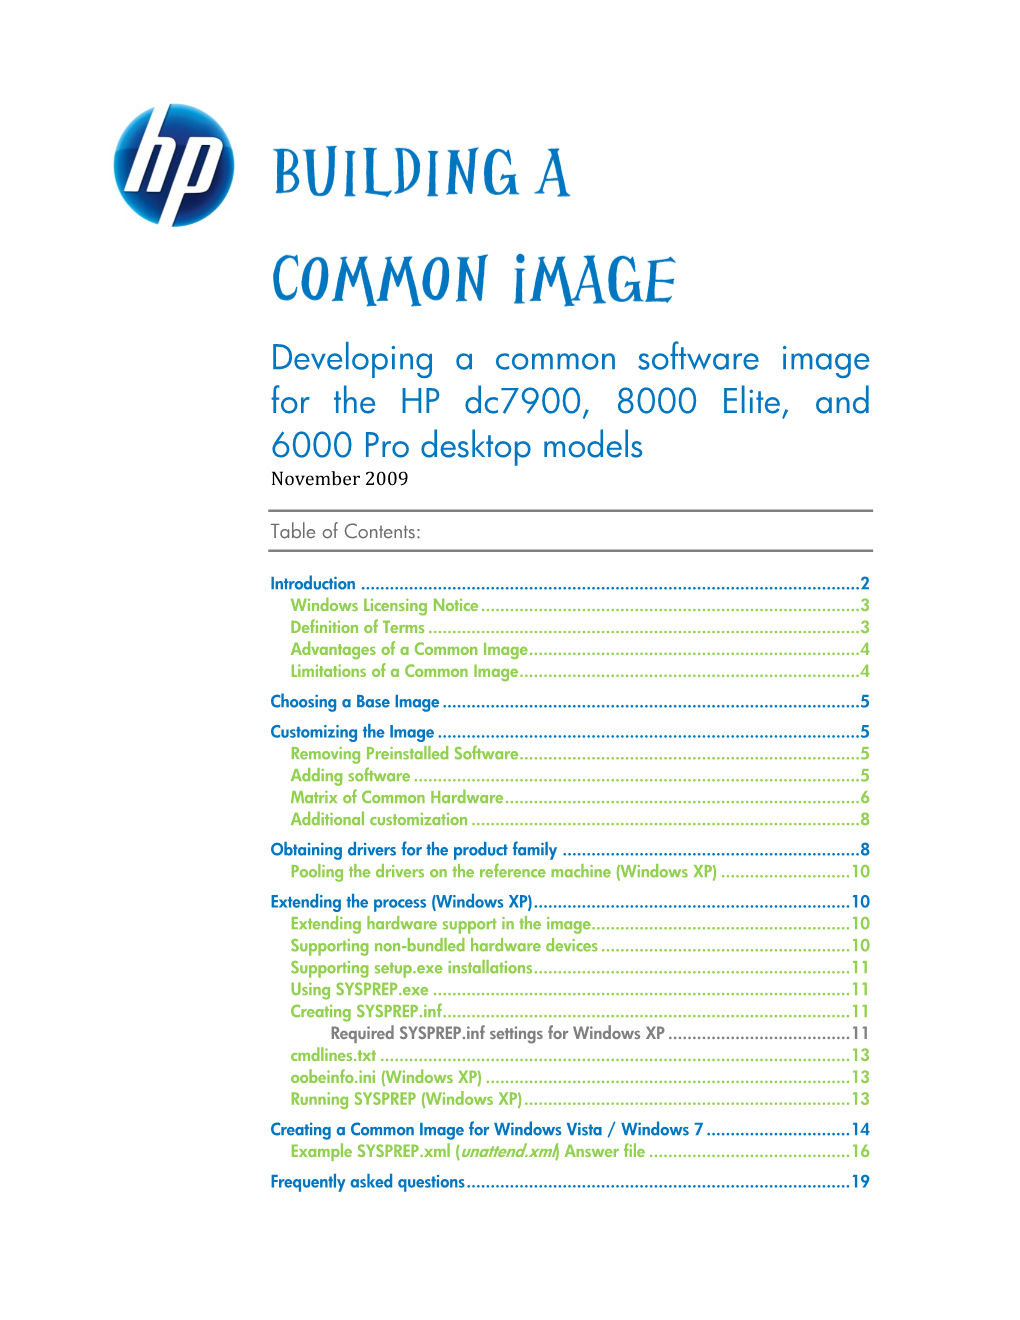 Developing a Common Software Image for the HP Dc7900, 8000 Elite, and 6000 Pro Desktop Models November 2009